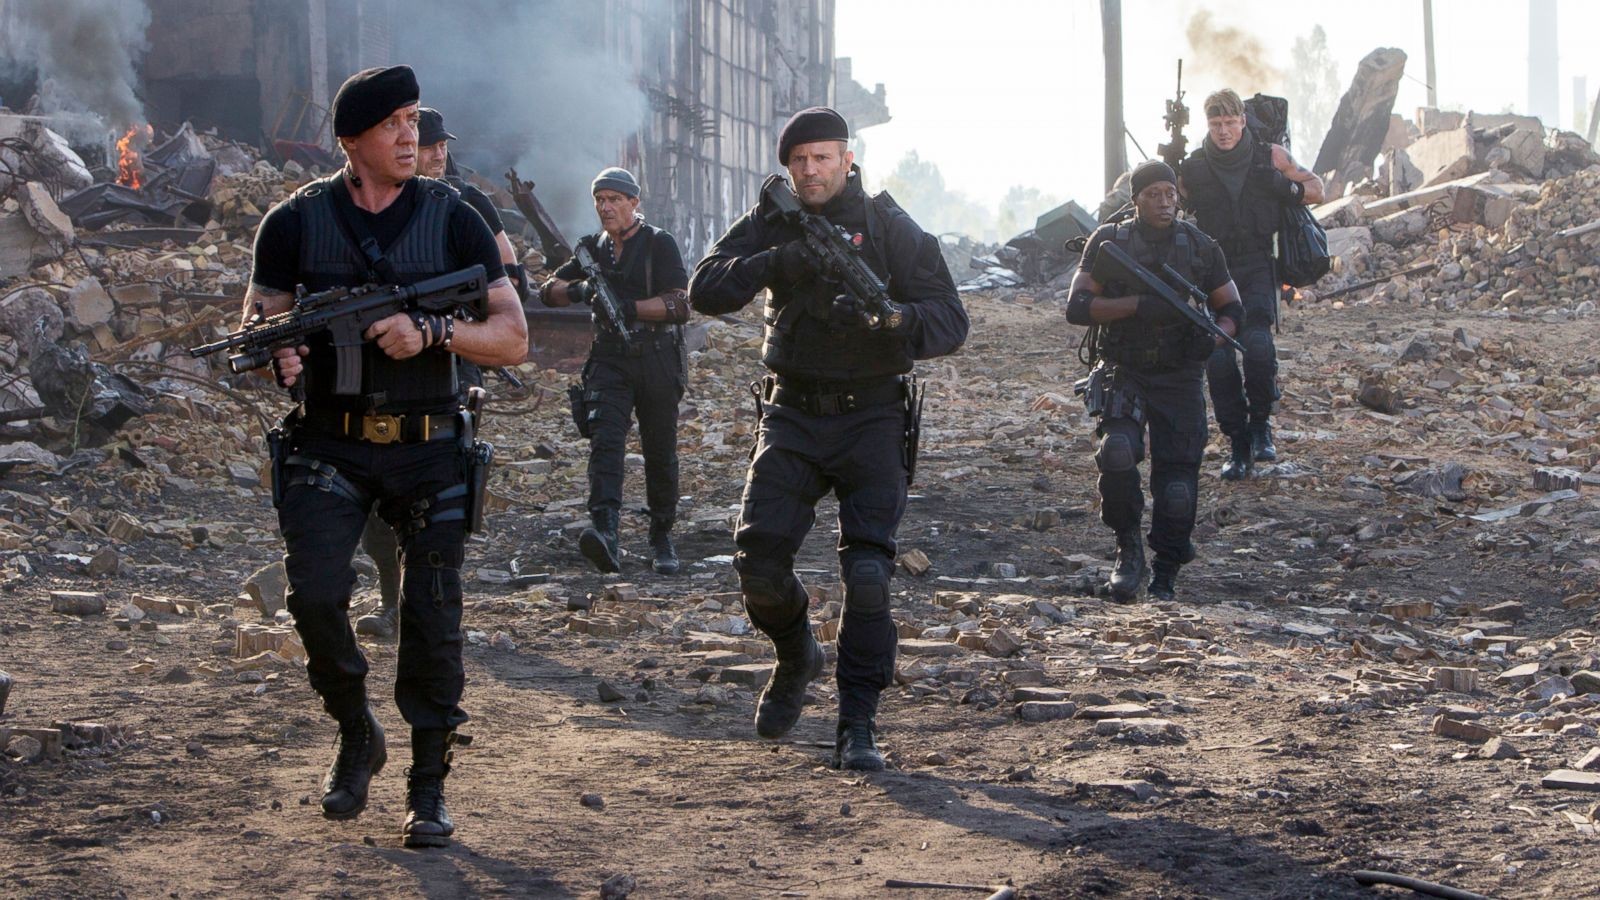 A still from The Expendables 3